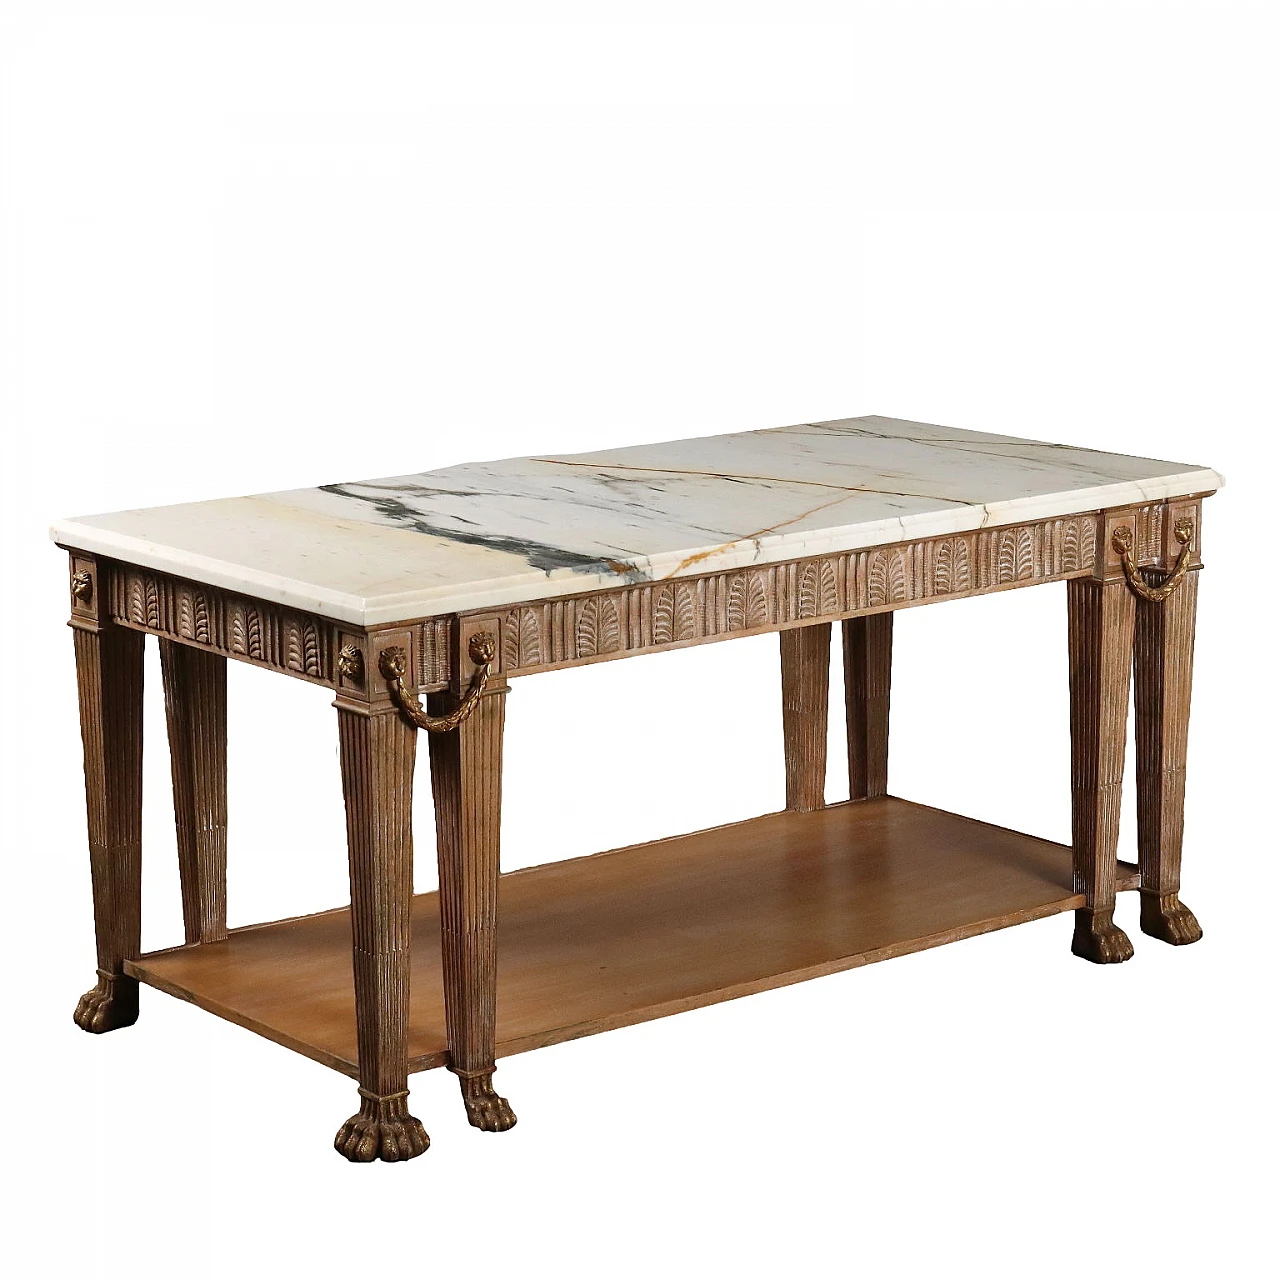 Wooden table with marbe top and lion feet 1